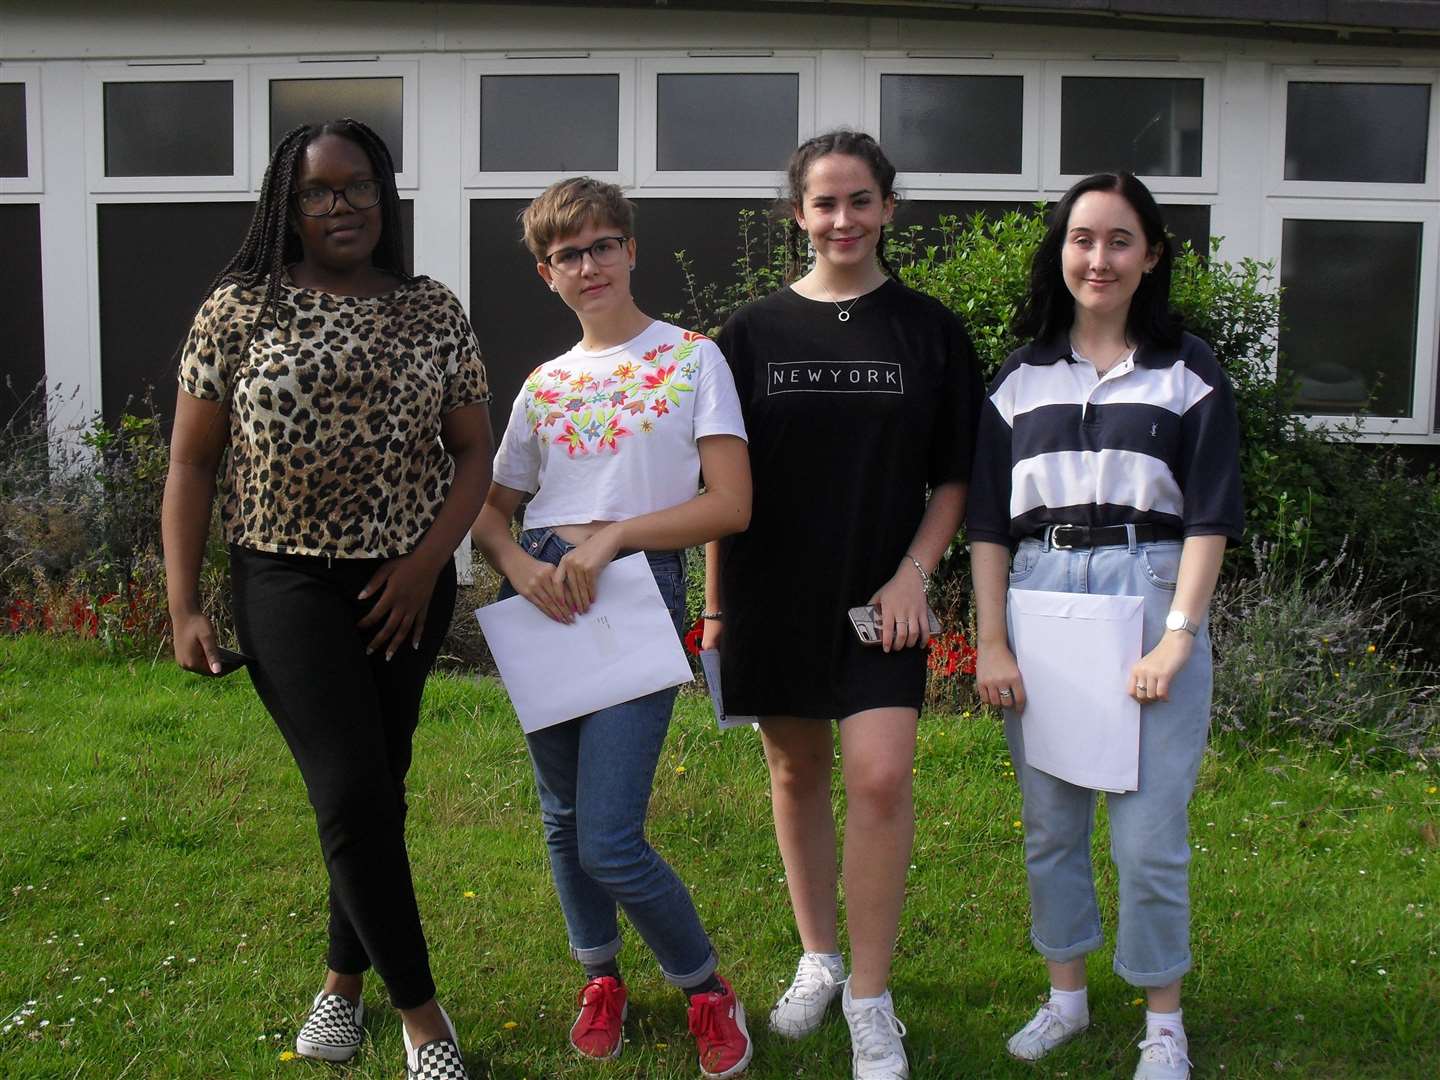 Highsted Grammar pupils collecting their results